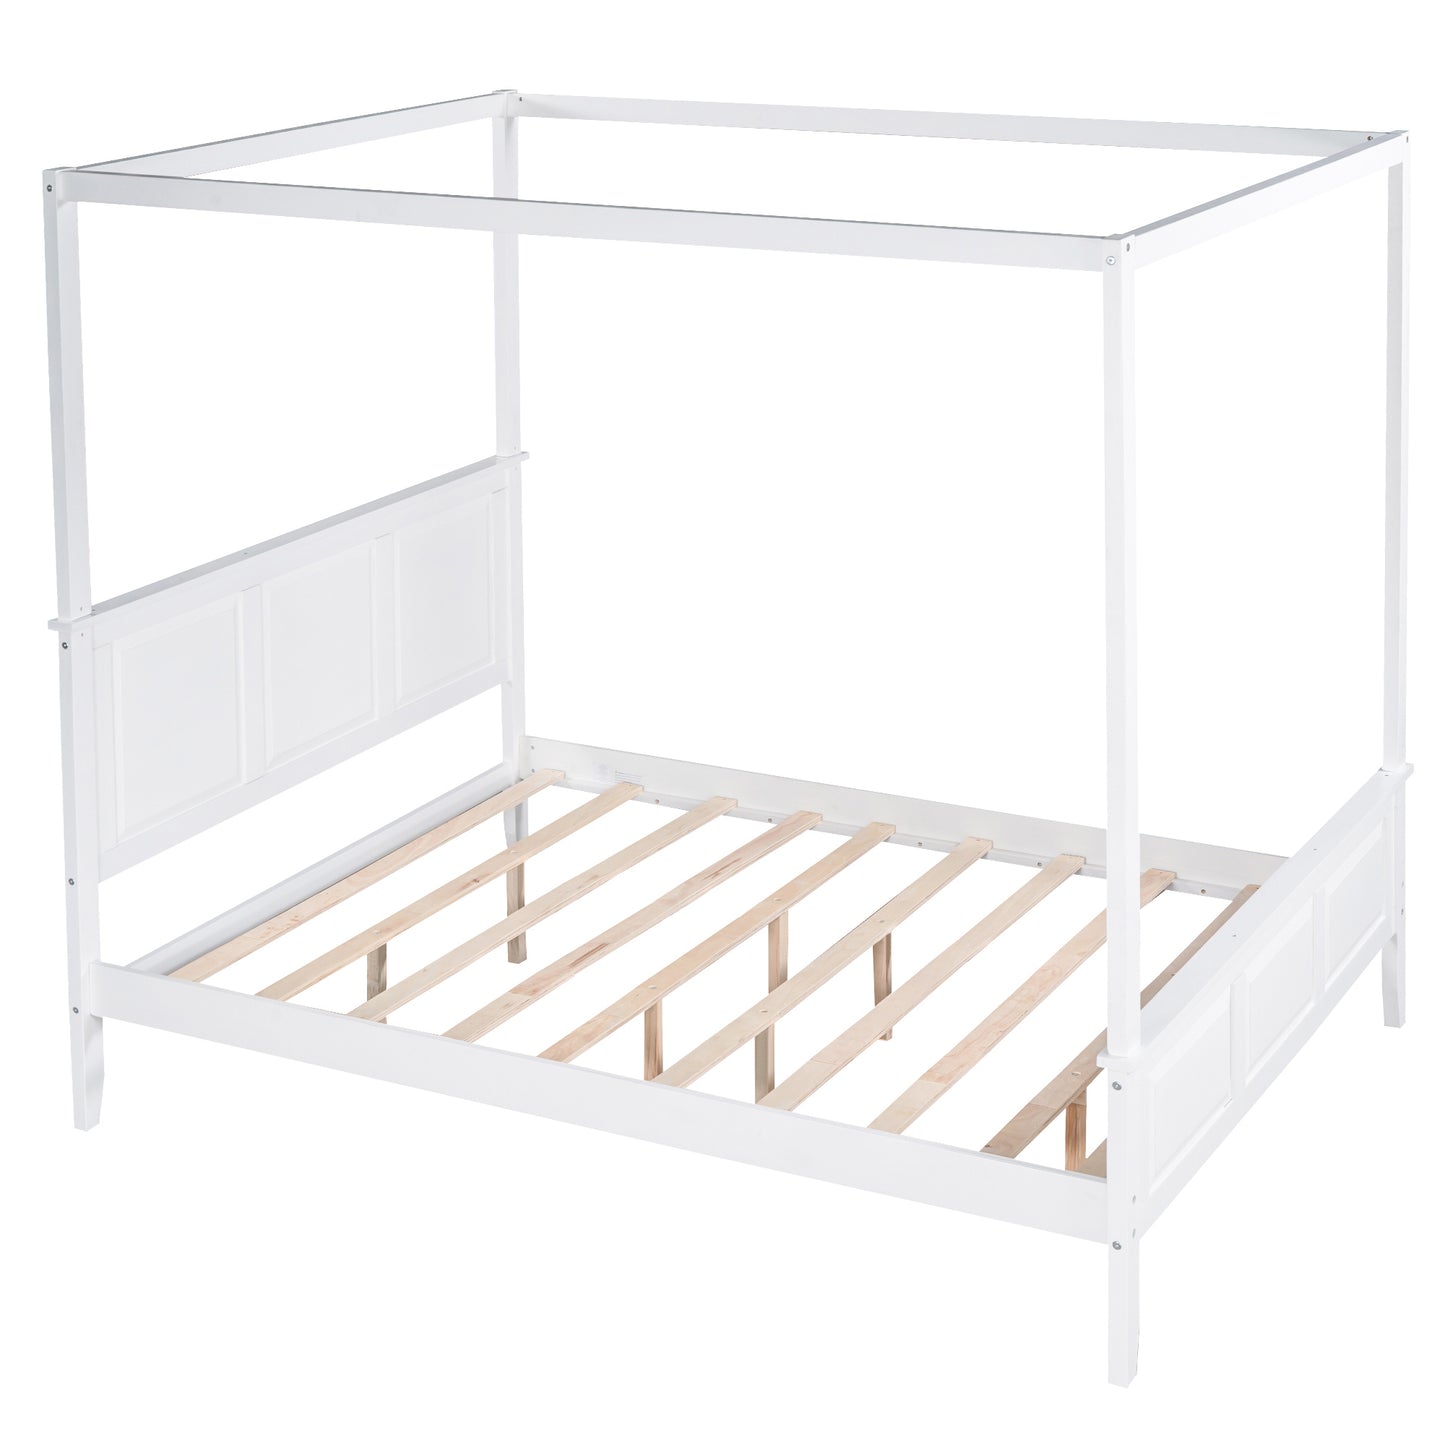 Queen Size Canopy Platform Bed with Headboard and Footboard,Slat Support Leg,White